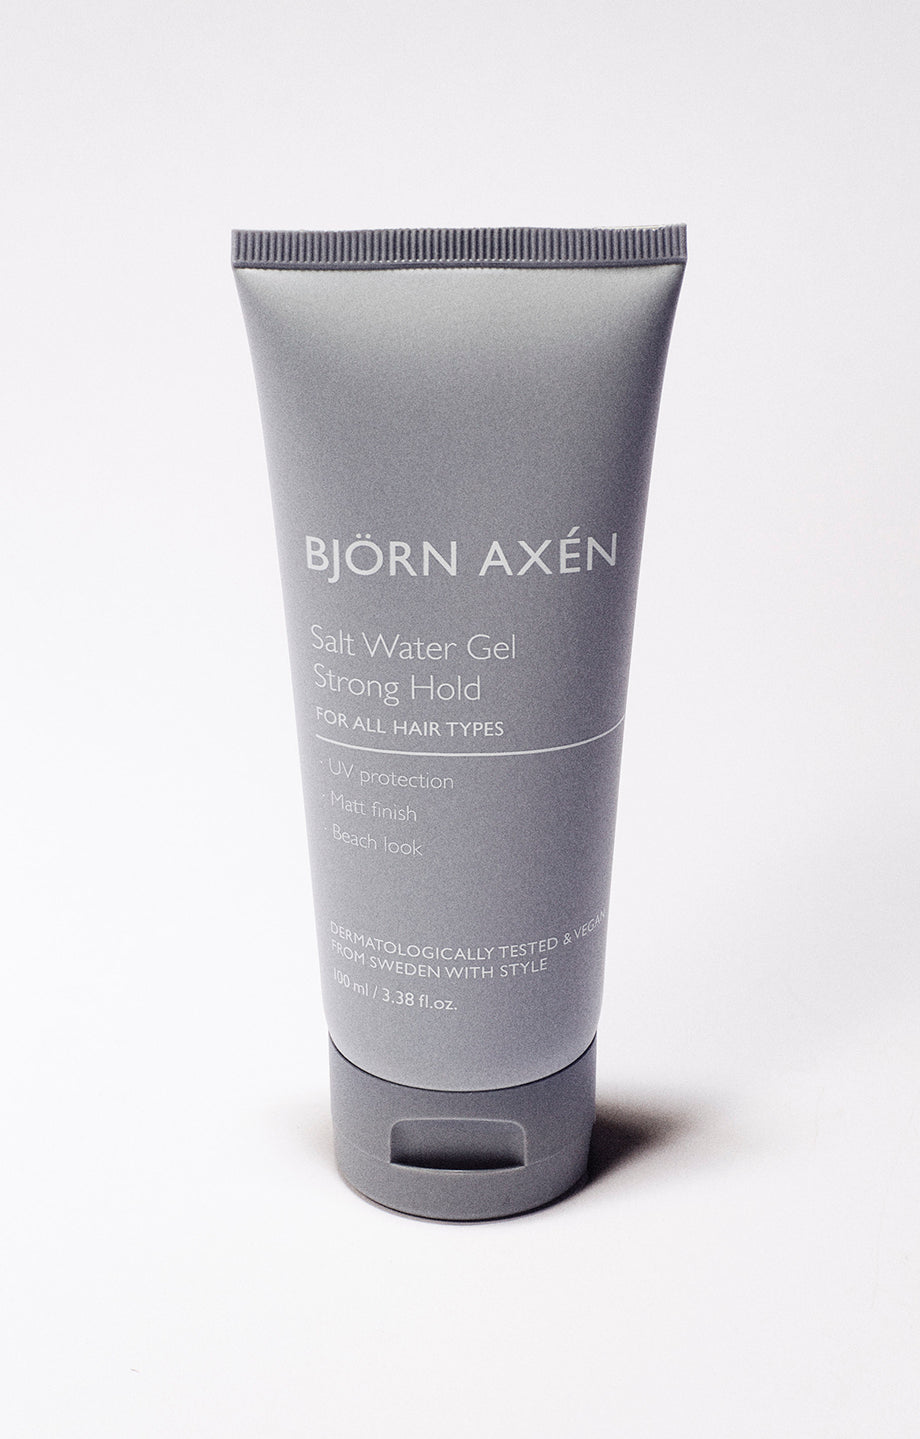 A styling gel that adds volume and texture